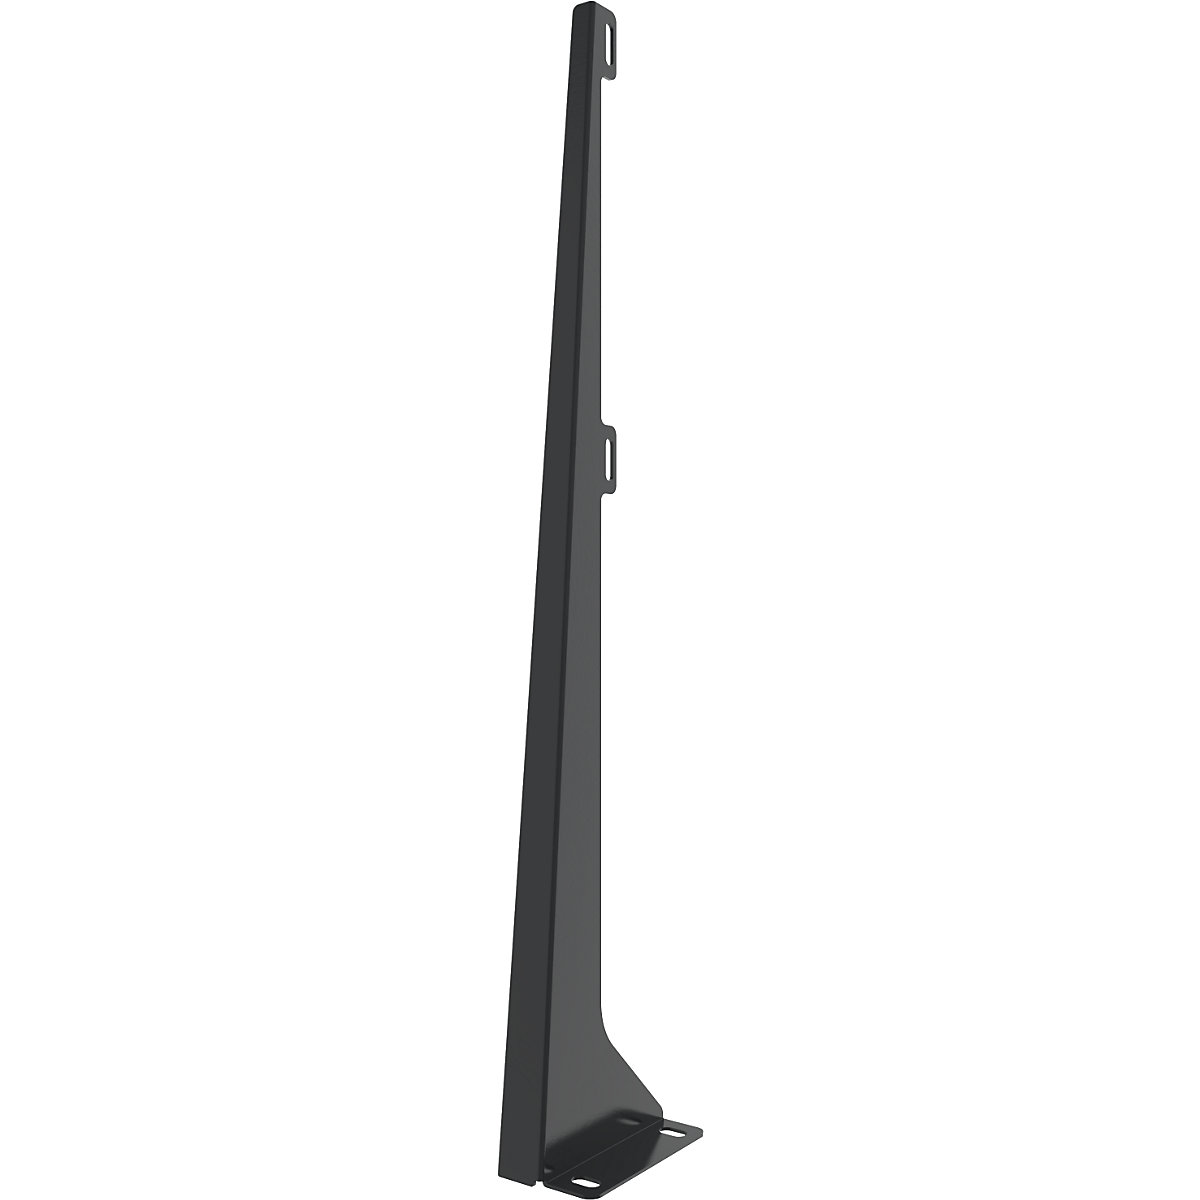 X-STORE 2.0 support upright for element height 1100 mm – Axelent